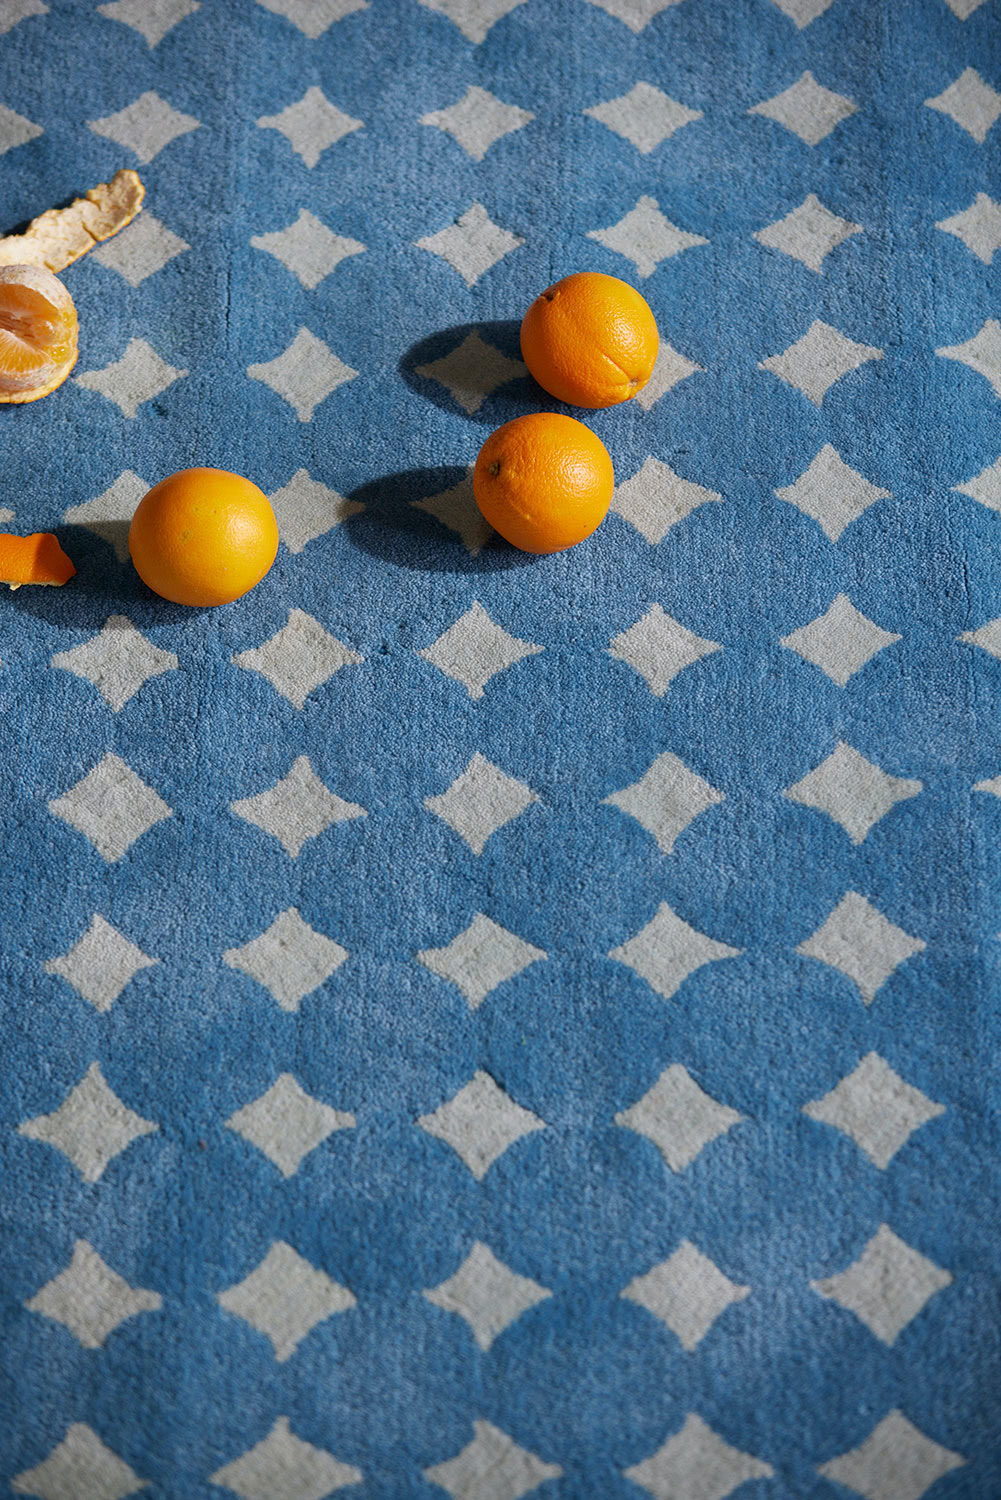 A blue area rug called Bongo Pool with oranges on it